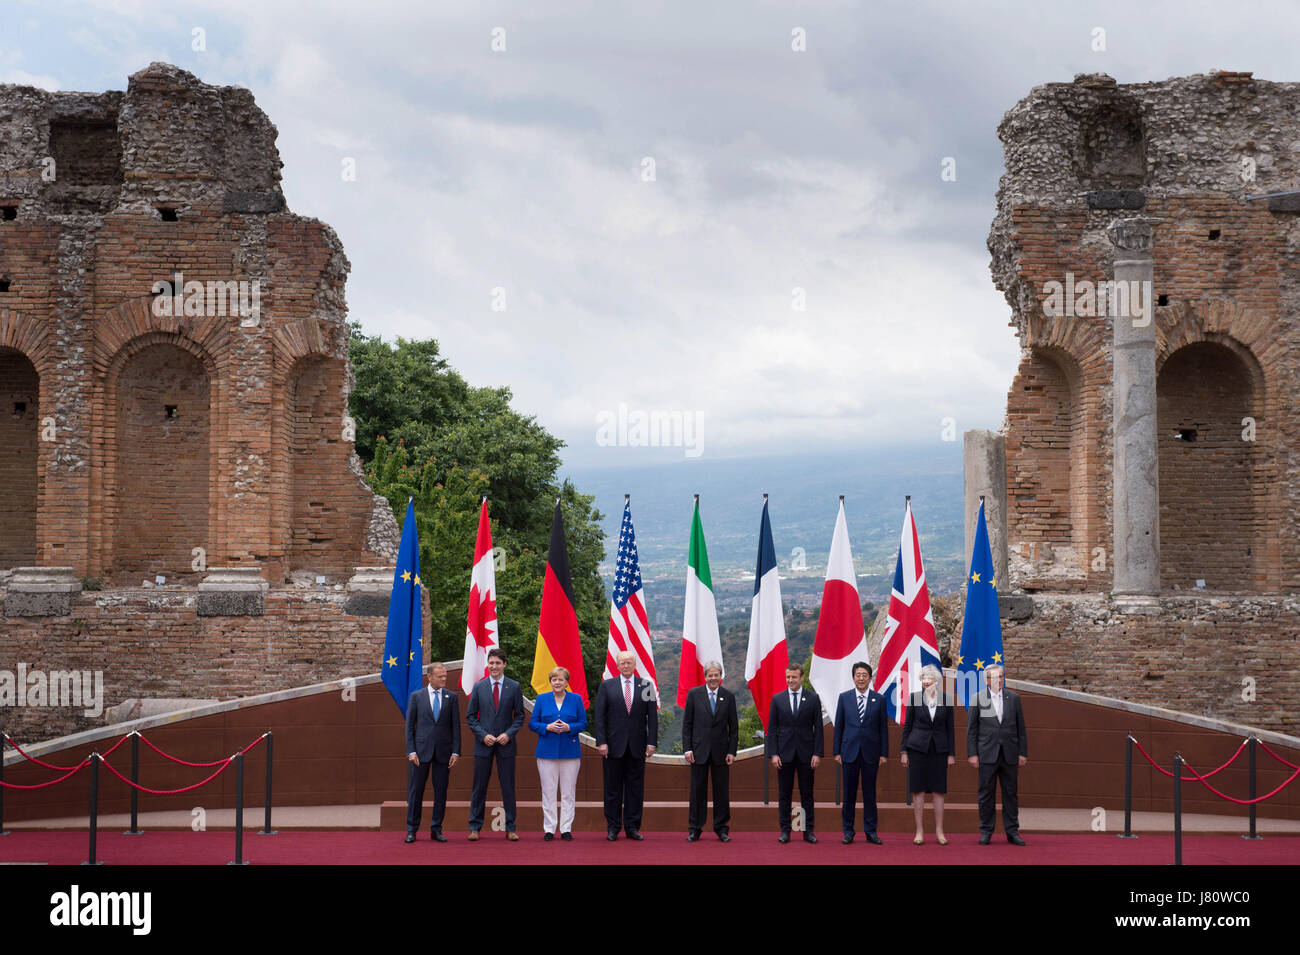 (From the left) President of the European Council Donald Tusk, Candian Prime Minister Justin Trudeau, German Chancellor Angela Merkel, US President Donald Trump, Italian Prime Minister Paolo Gentiloni, French President Emmanuel Macron, Japanese Prime Minister Shinzo Abe, Prime Minister Theresa May and President of the European Commission Jean-Claude Juncker pose for the family photo at the G7 summit at Teatro Greco in Taormina, Sicily, Italy. Stock Photo